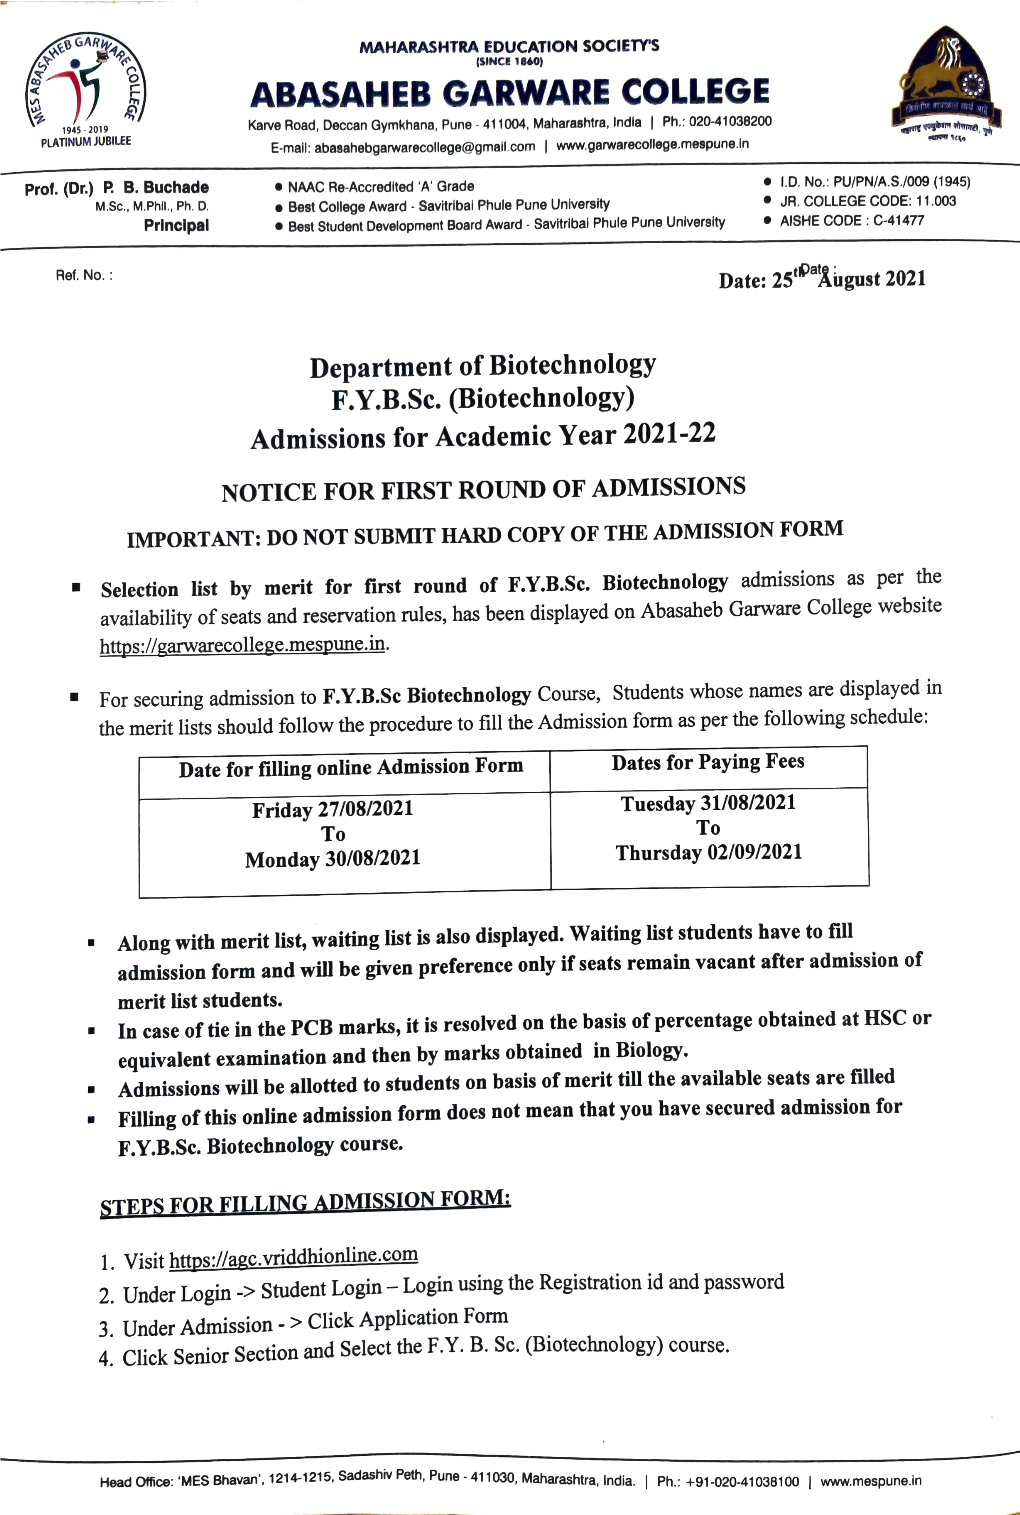 F.Y.B.Sc. Biotechnology Admission First Round Notice and Merit List